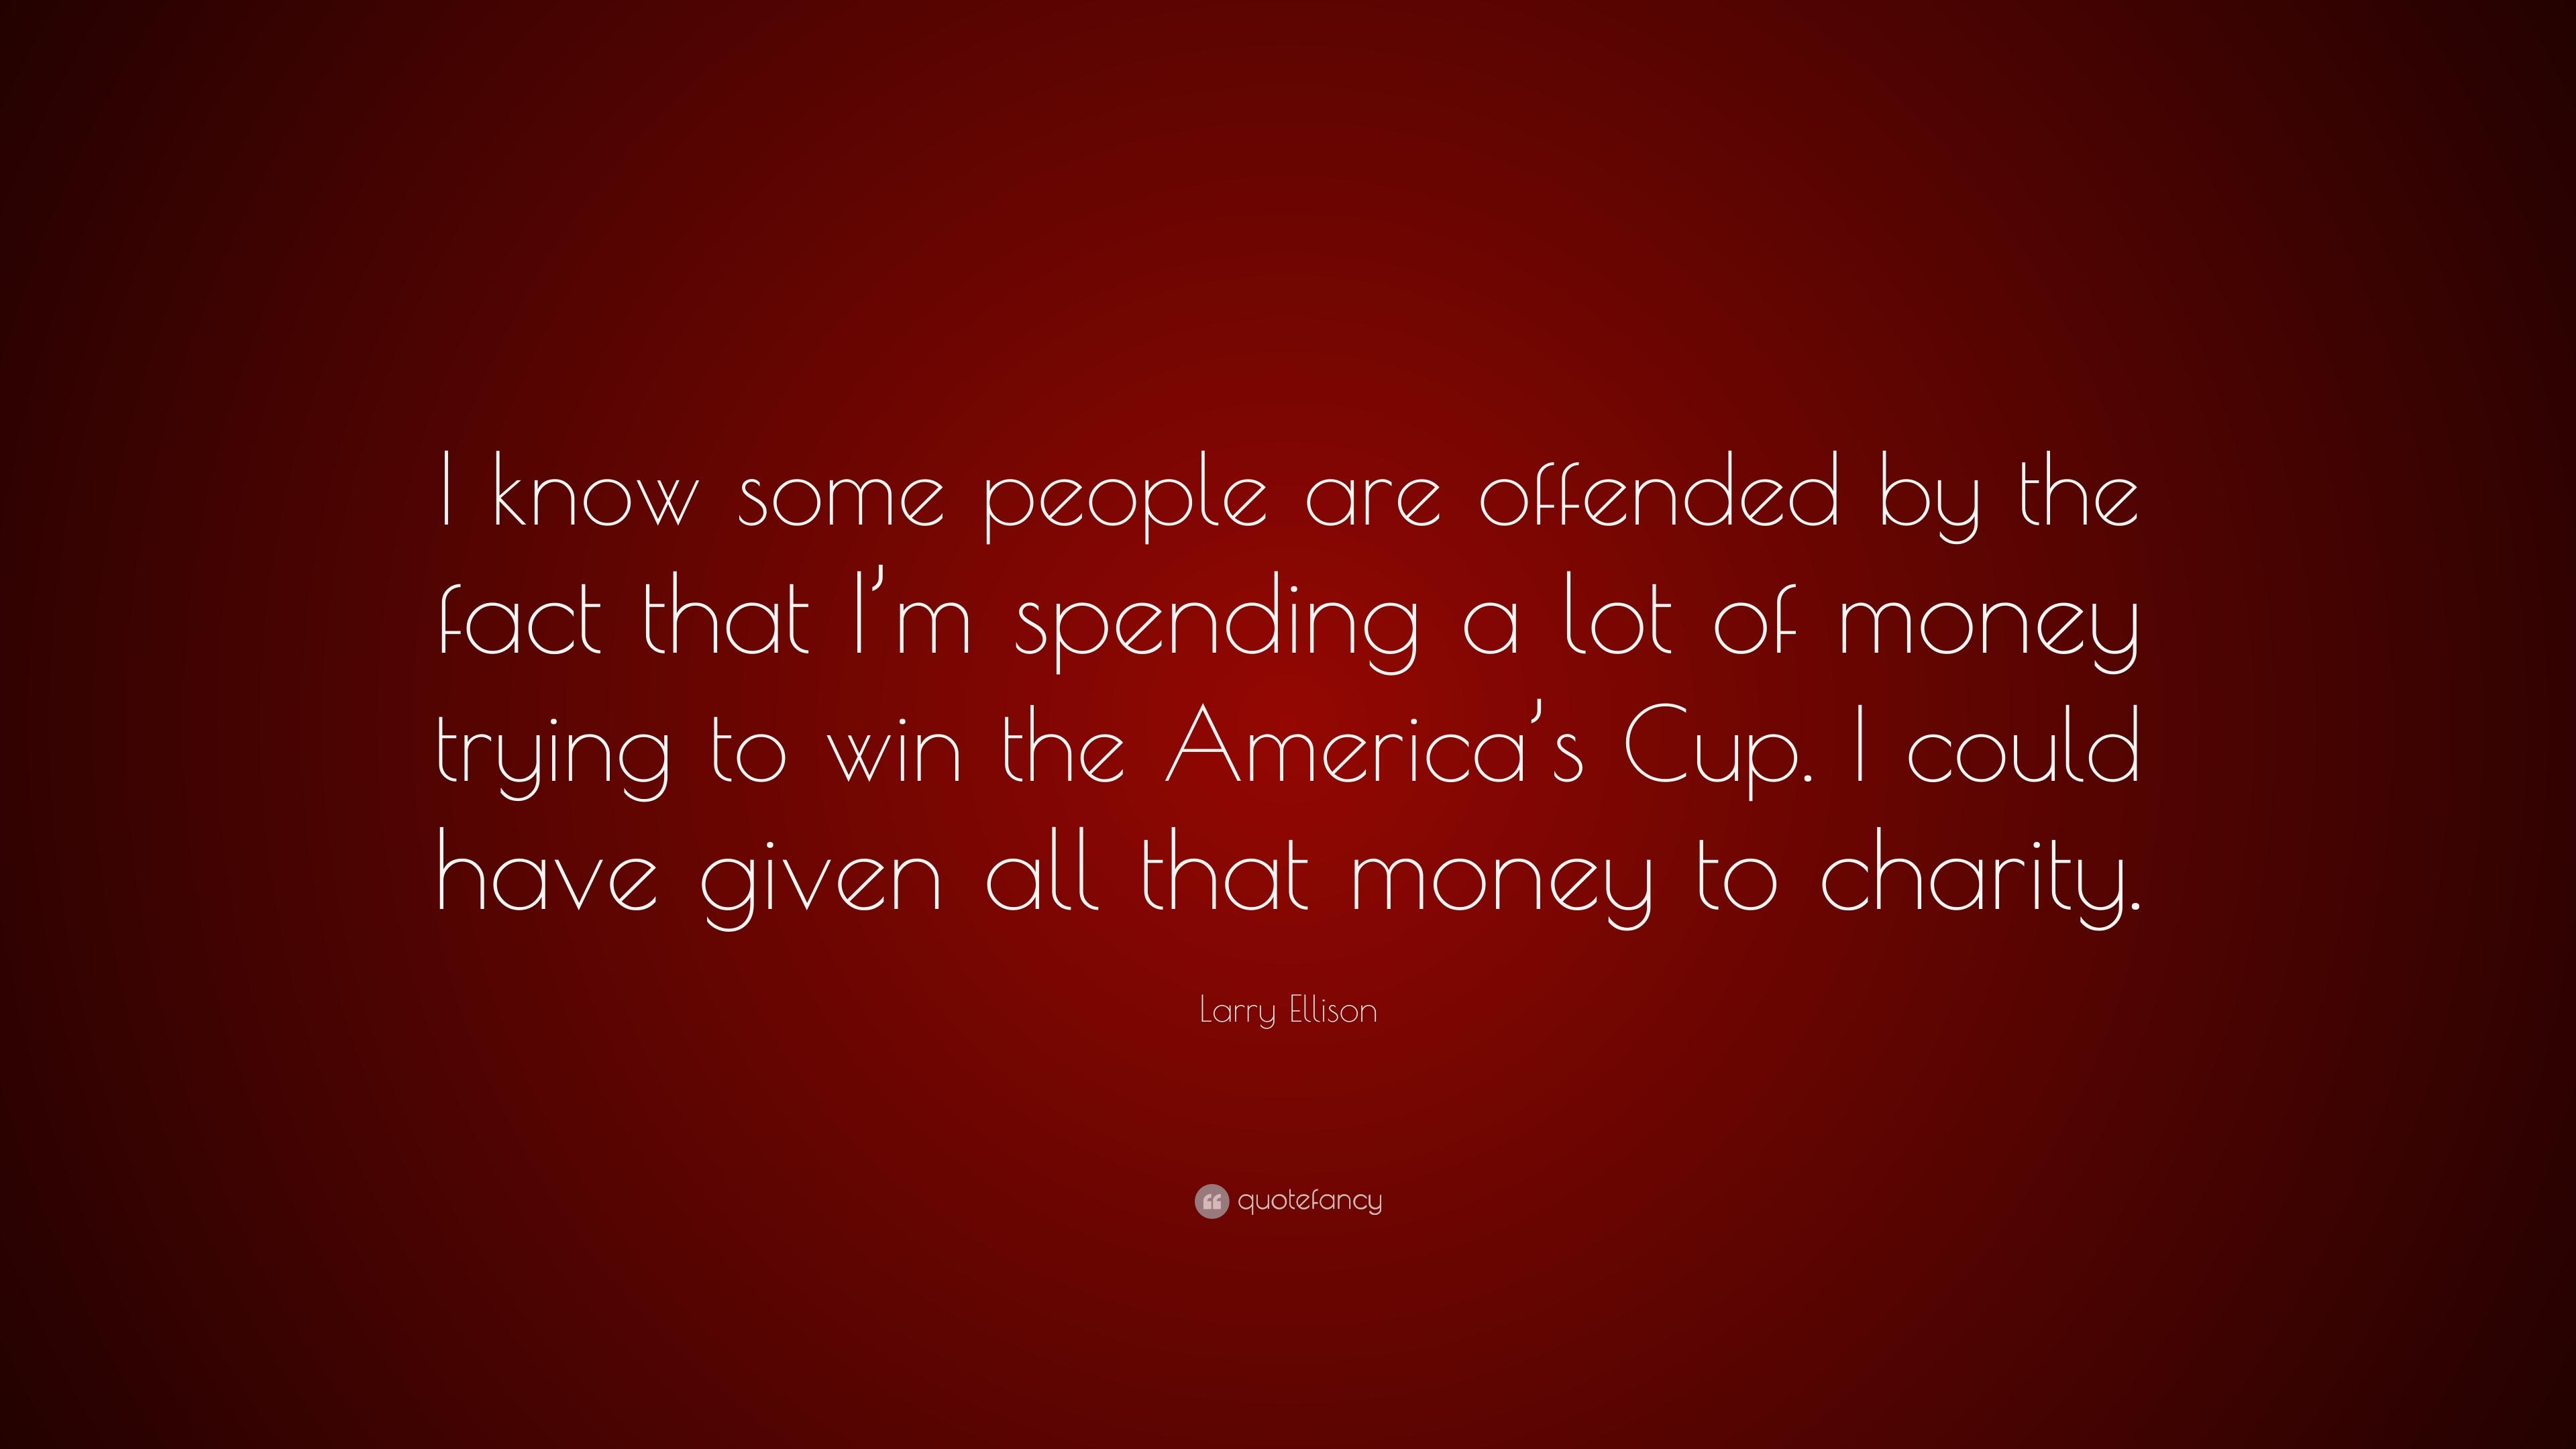 Larry Ellison Quote: “I know some people are offended